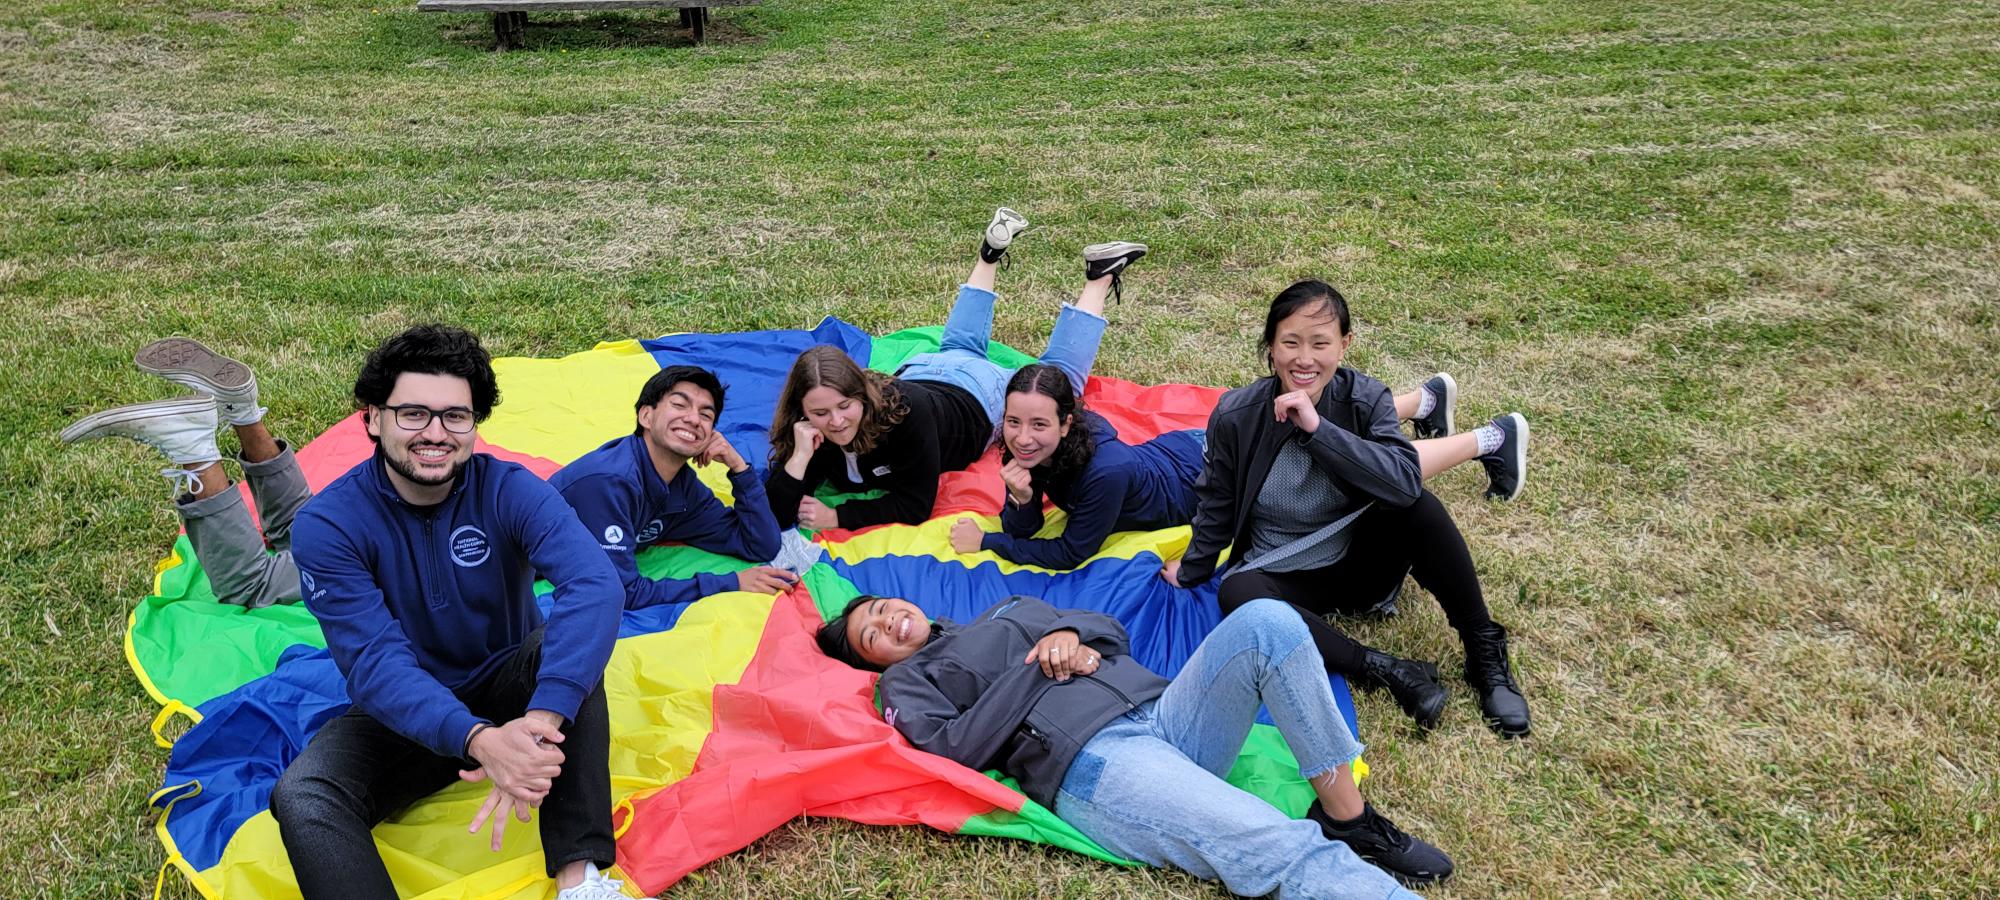 A group of Americorps members is seen sitting and laying on a rainbow cloth. From left to right: Jack Dokhanchi, Johnny Reyes, Autumn Kleinman, Emily Pham, Aurora Golden-Appleton, Mindy Dai.